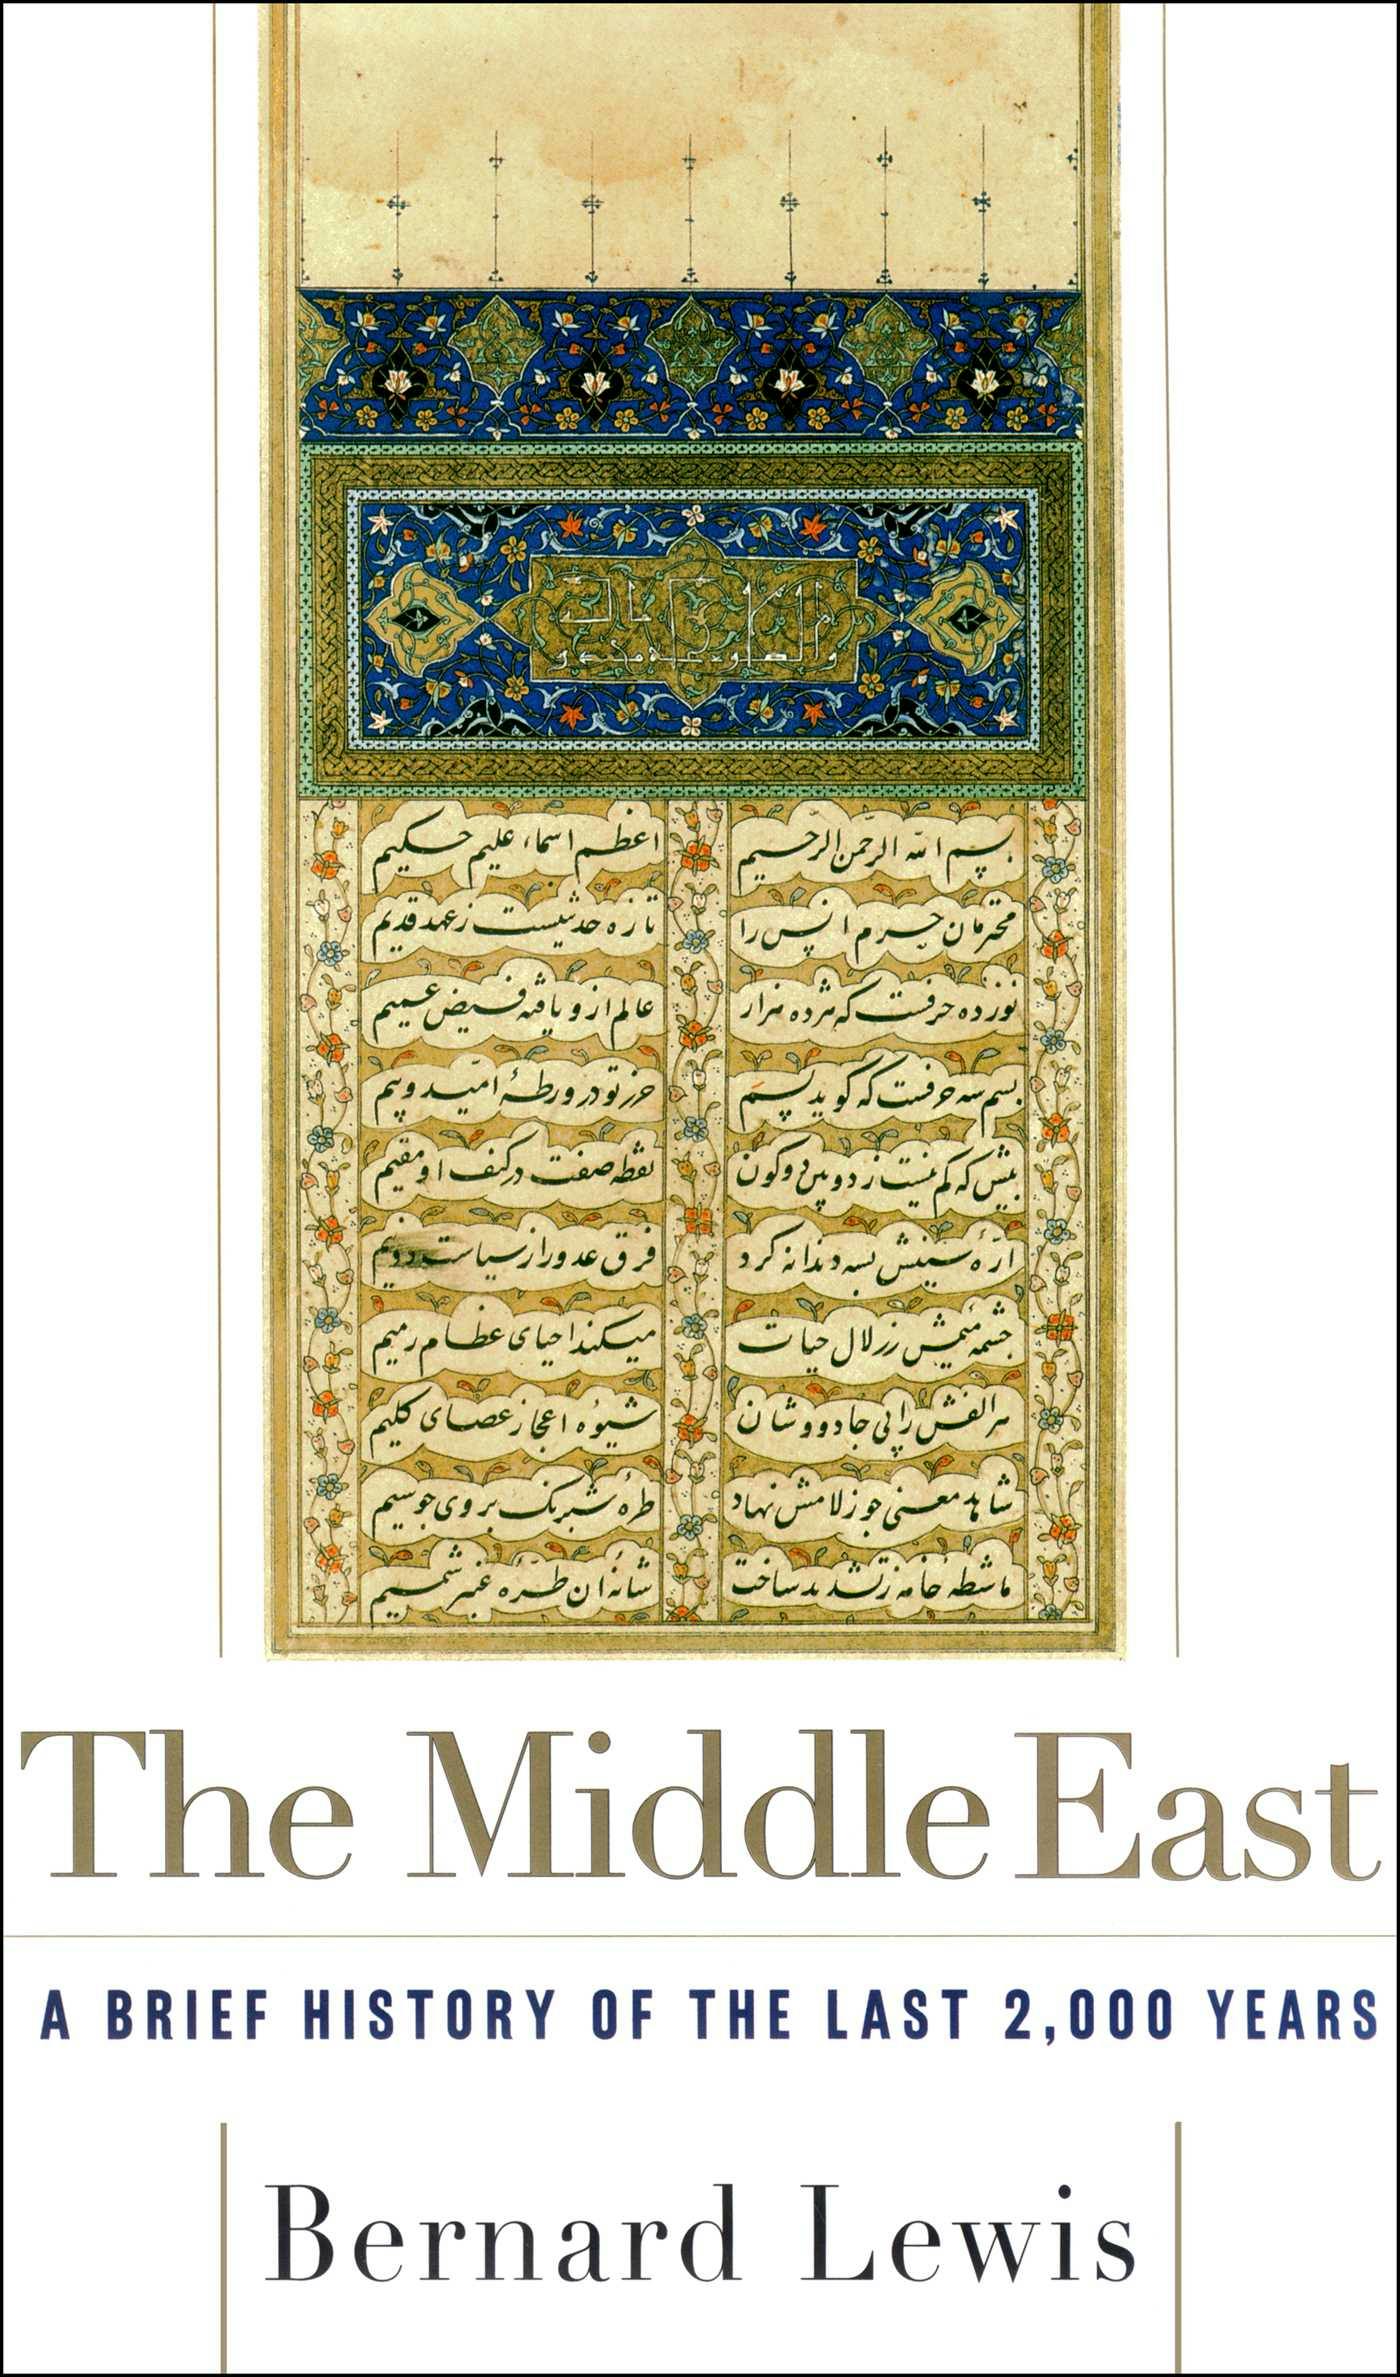 The Middle East - Bernard Lewis